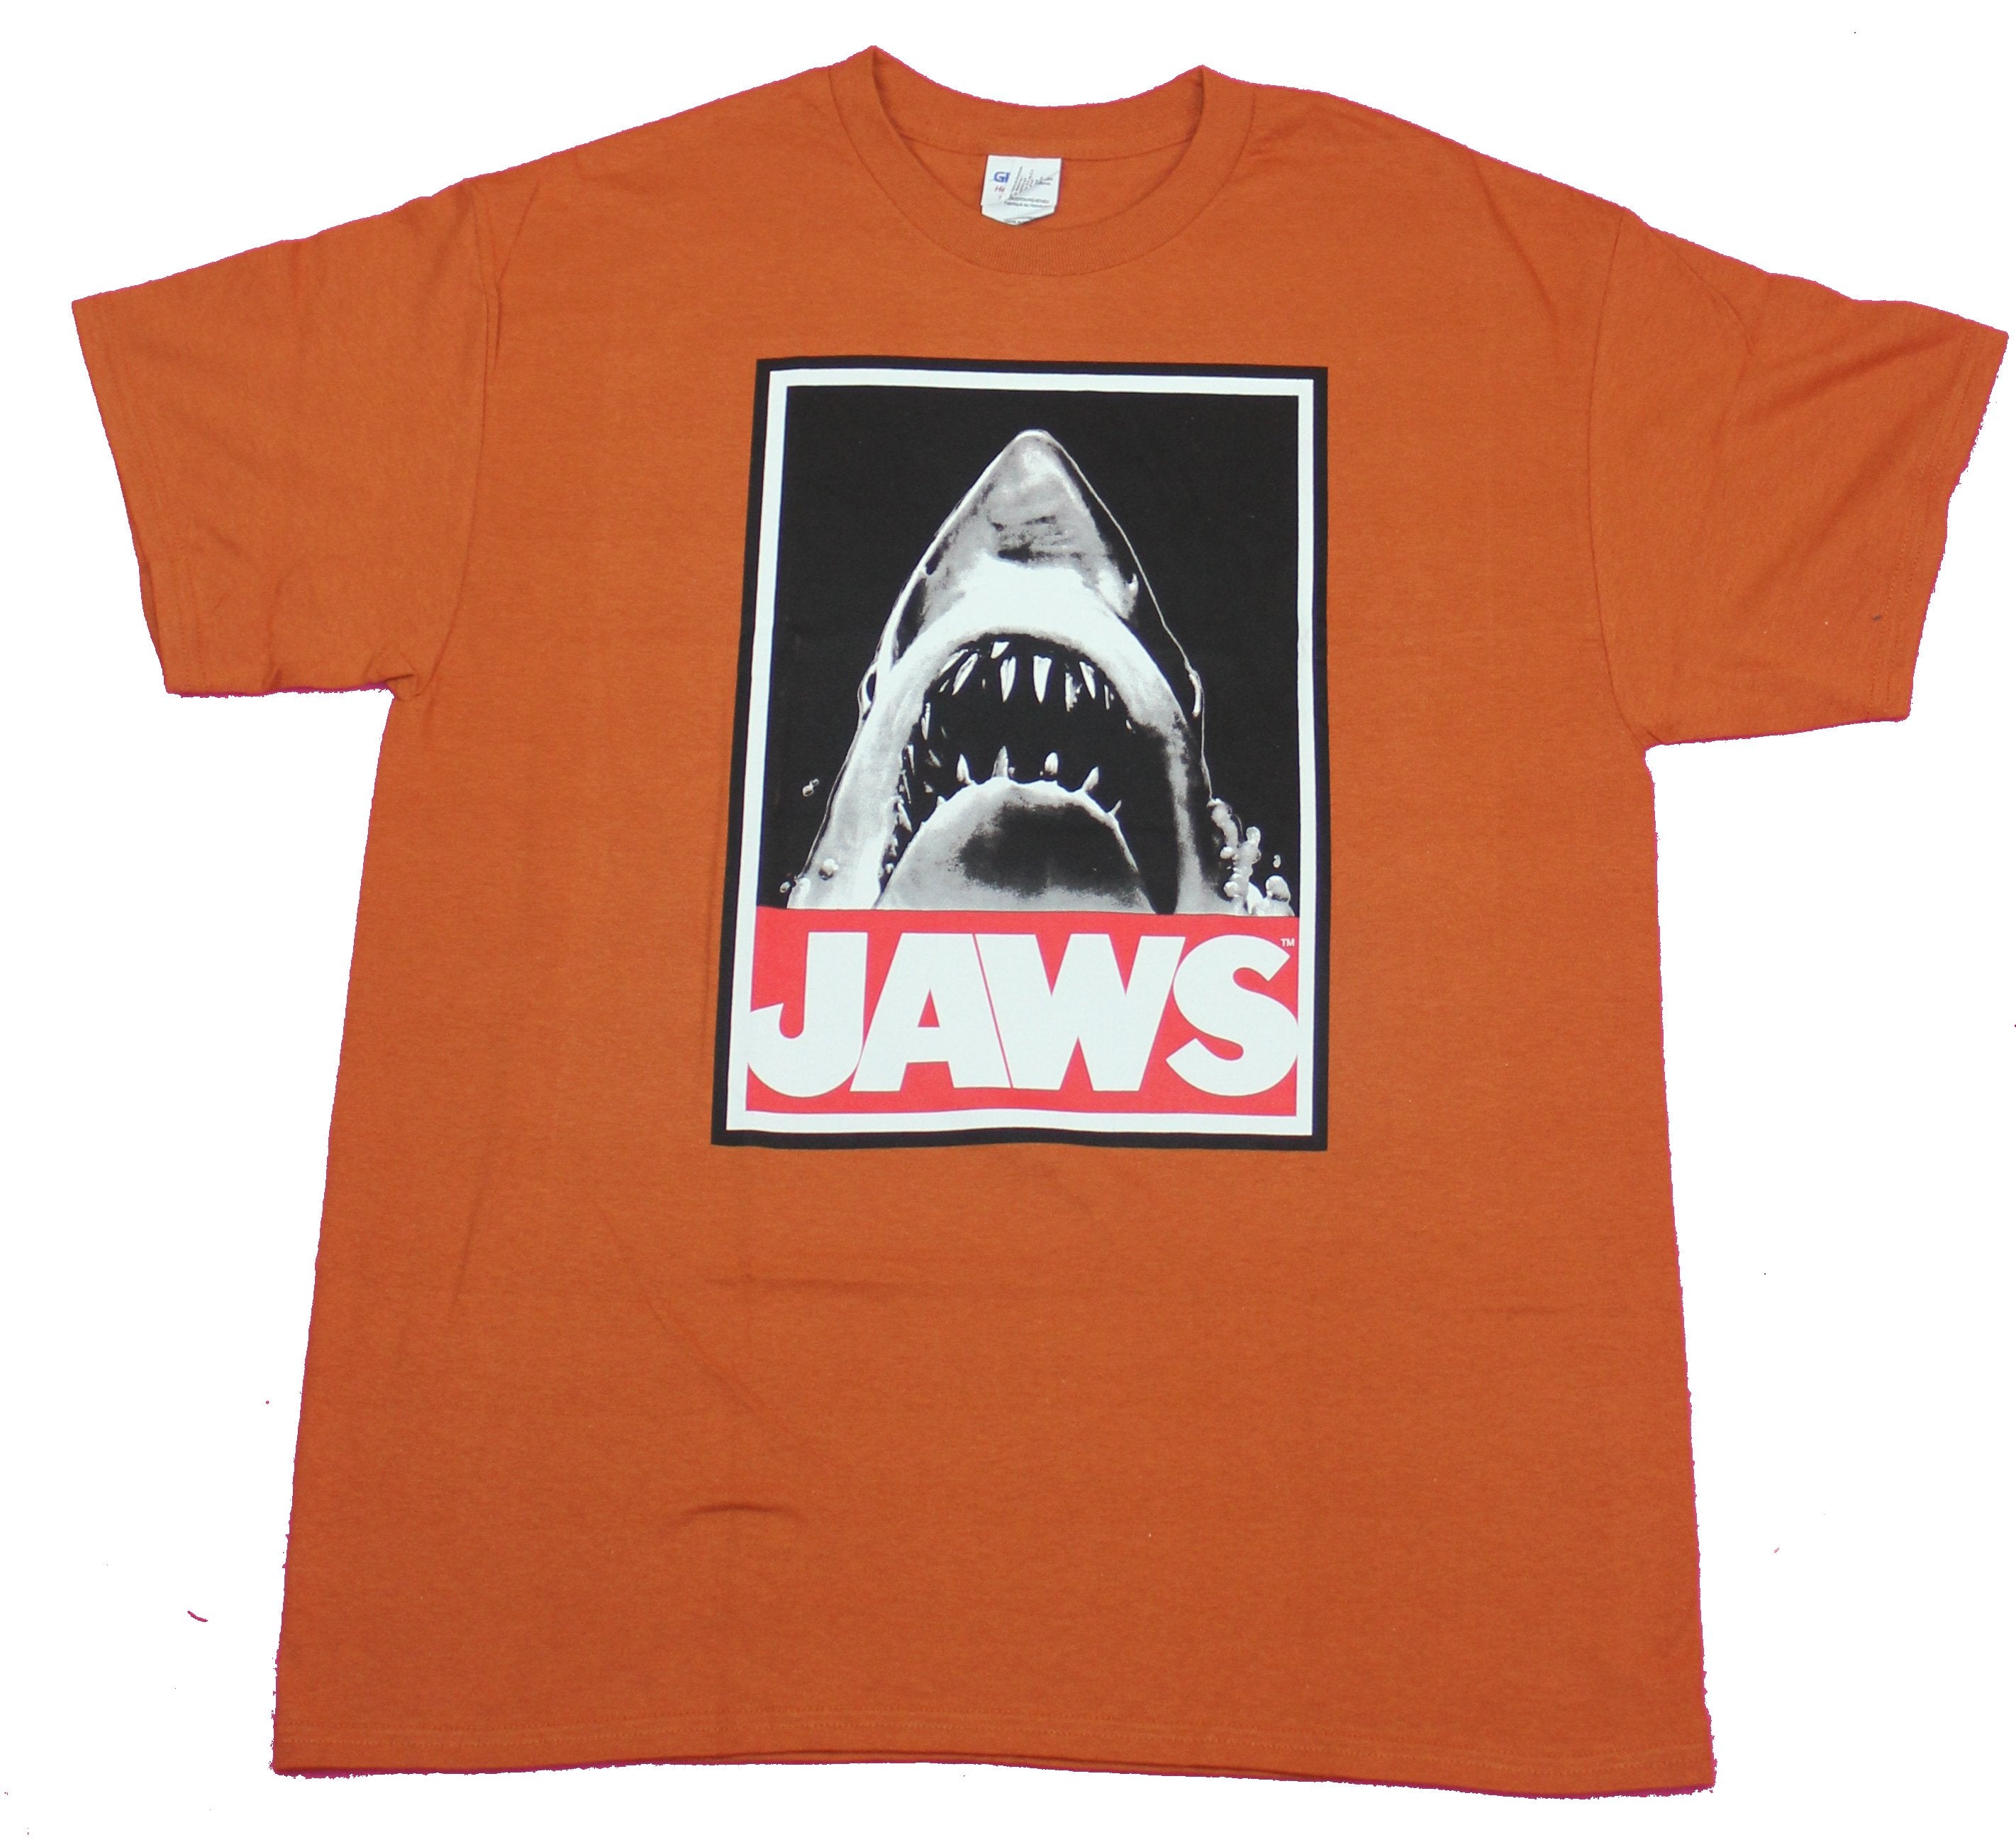 Jaws Mens T-Shirt- Big Mouth Shark Over Red Name Image